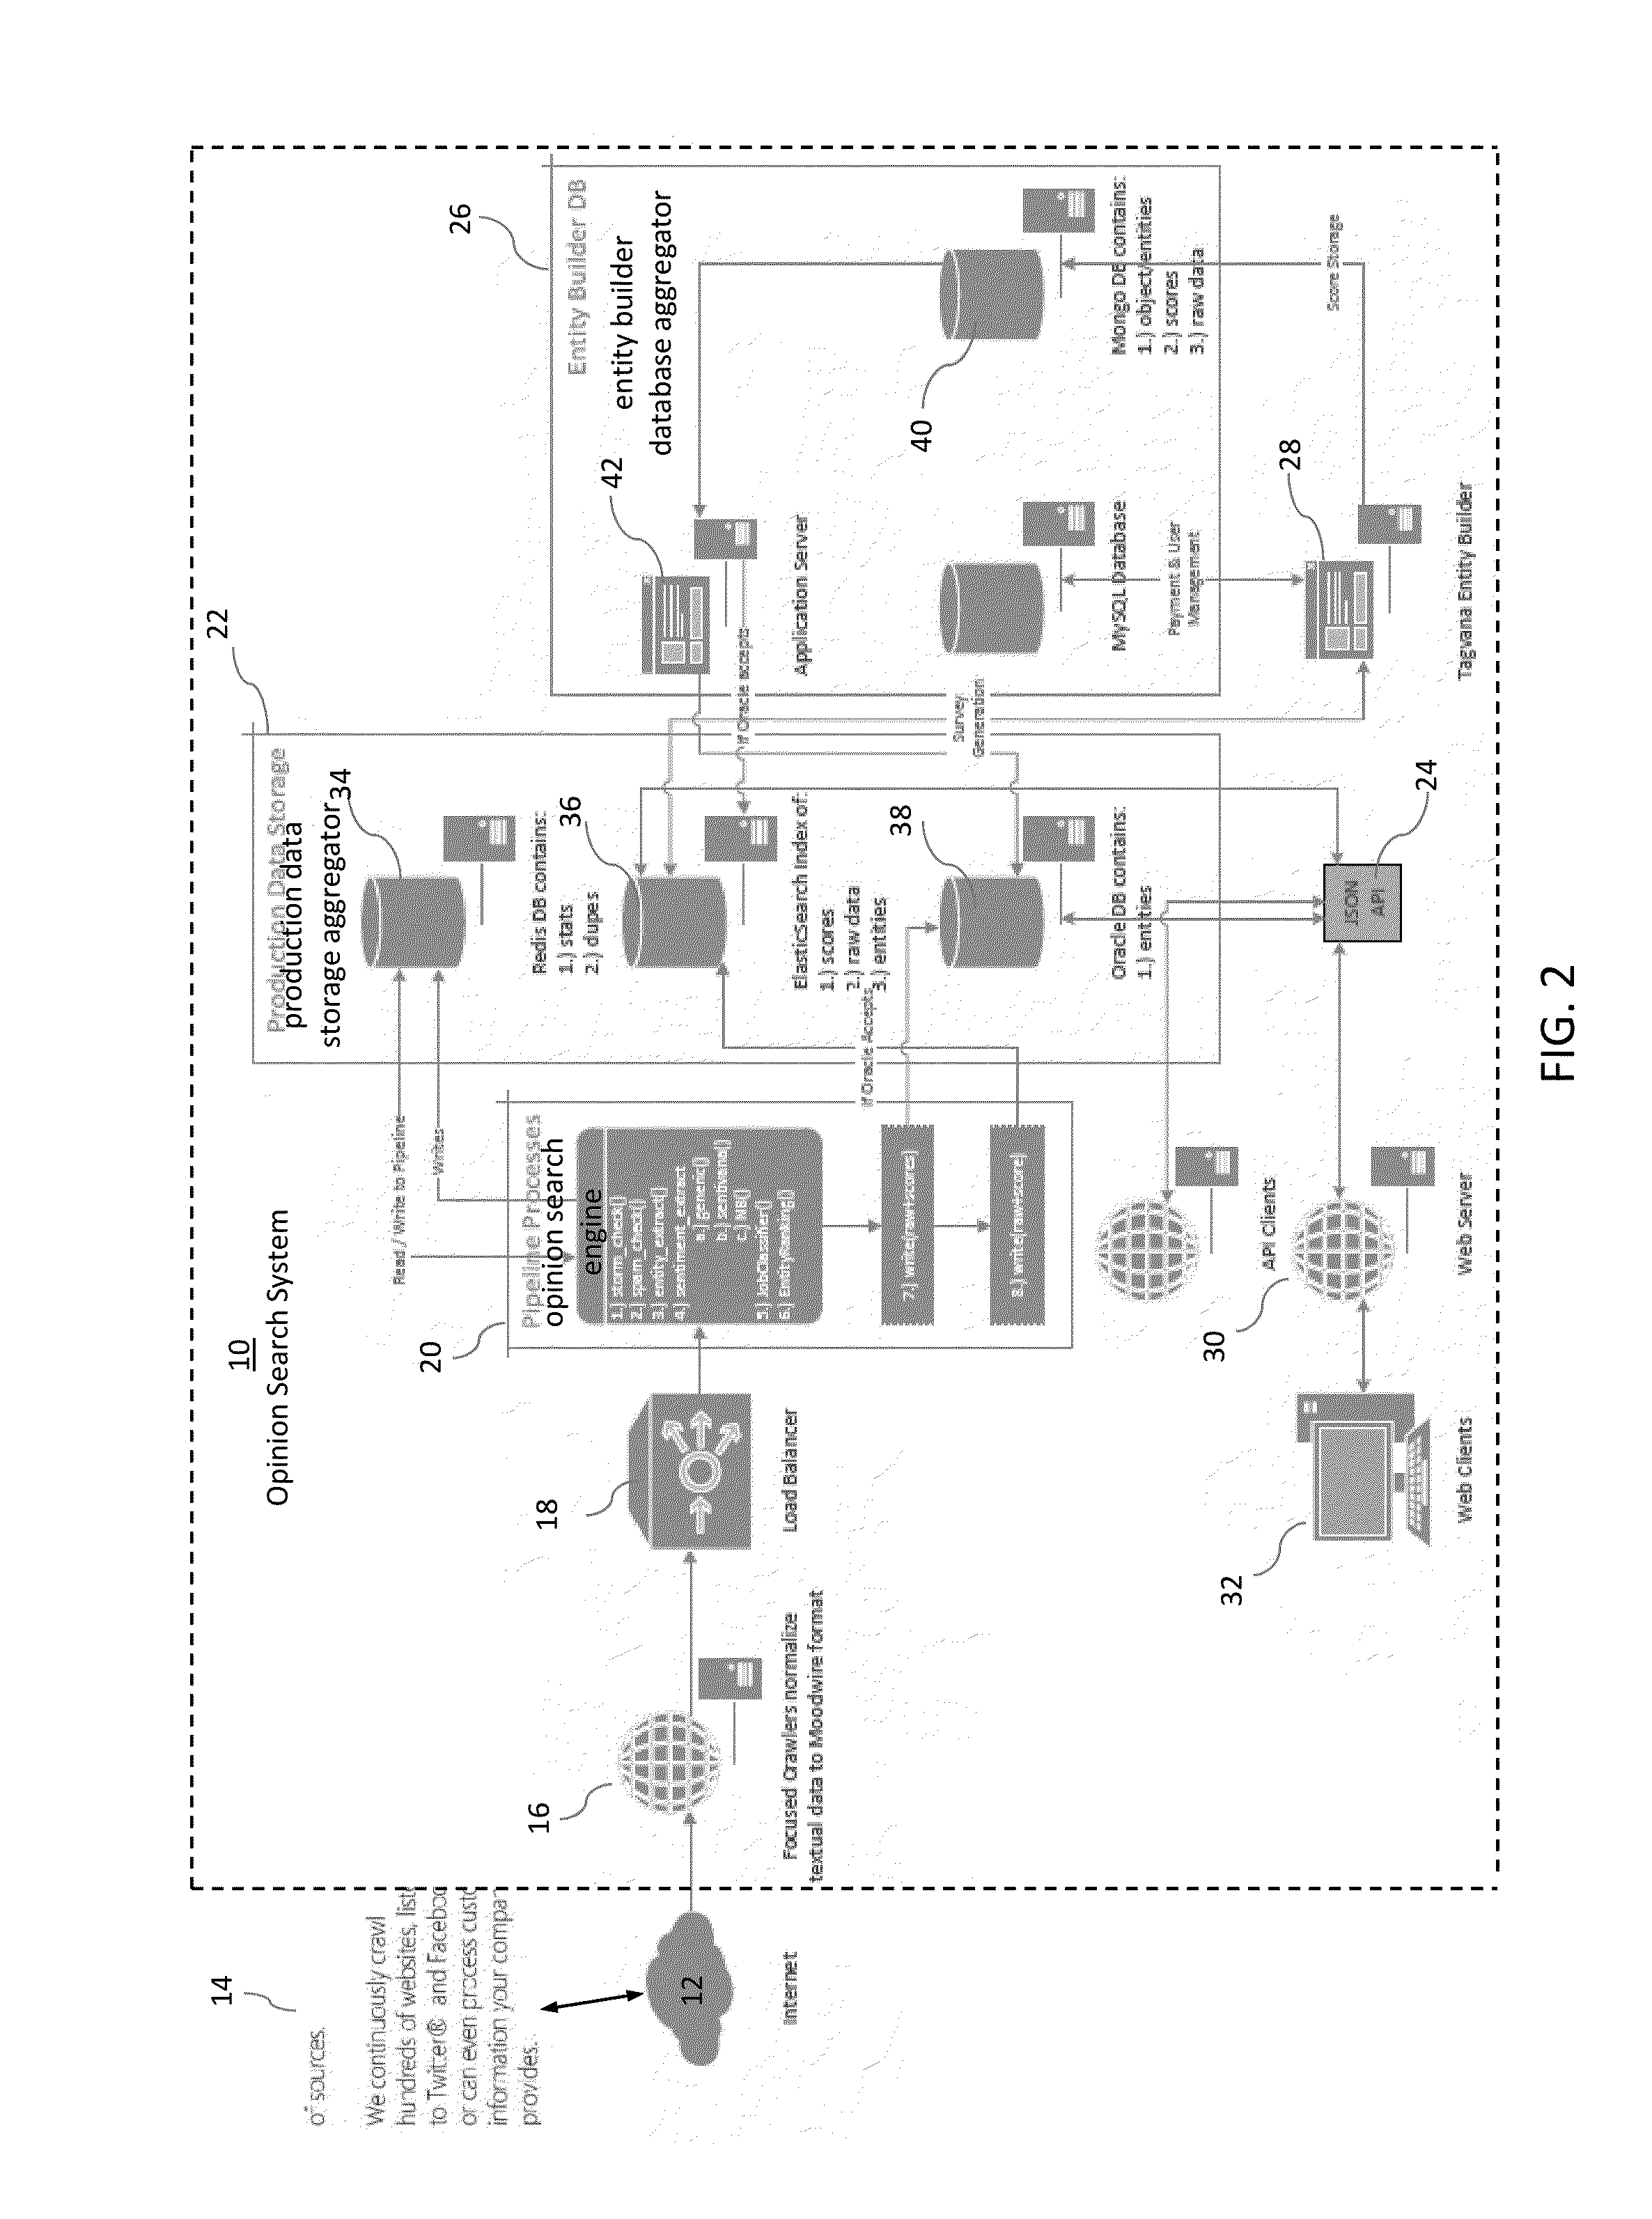 Method and system for conducting an opinion search engine and a display thereof